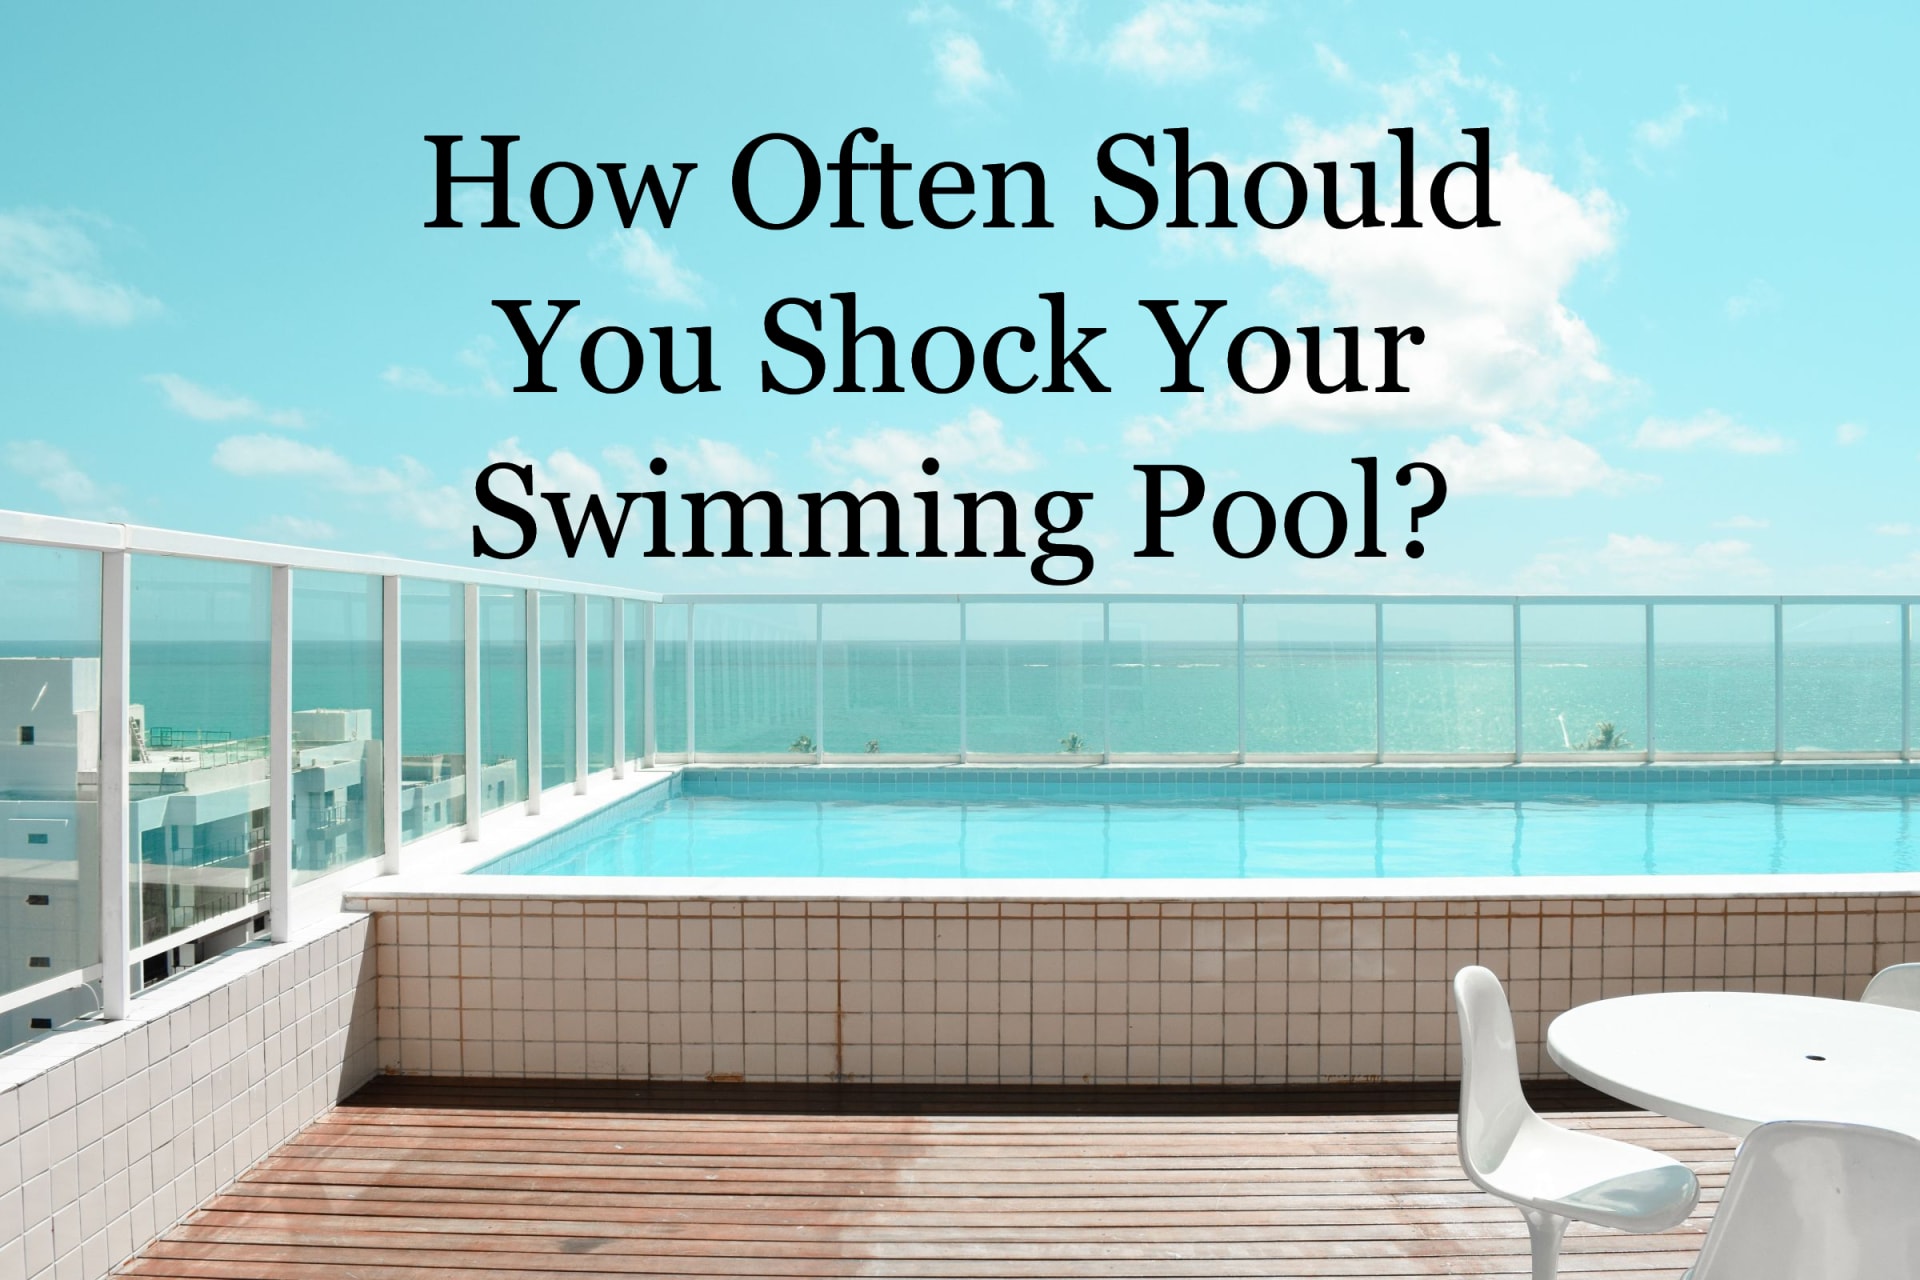 A swimming pool that needs to be shocked